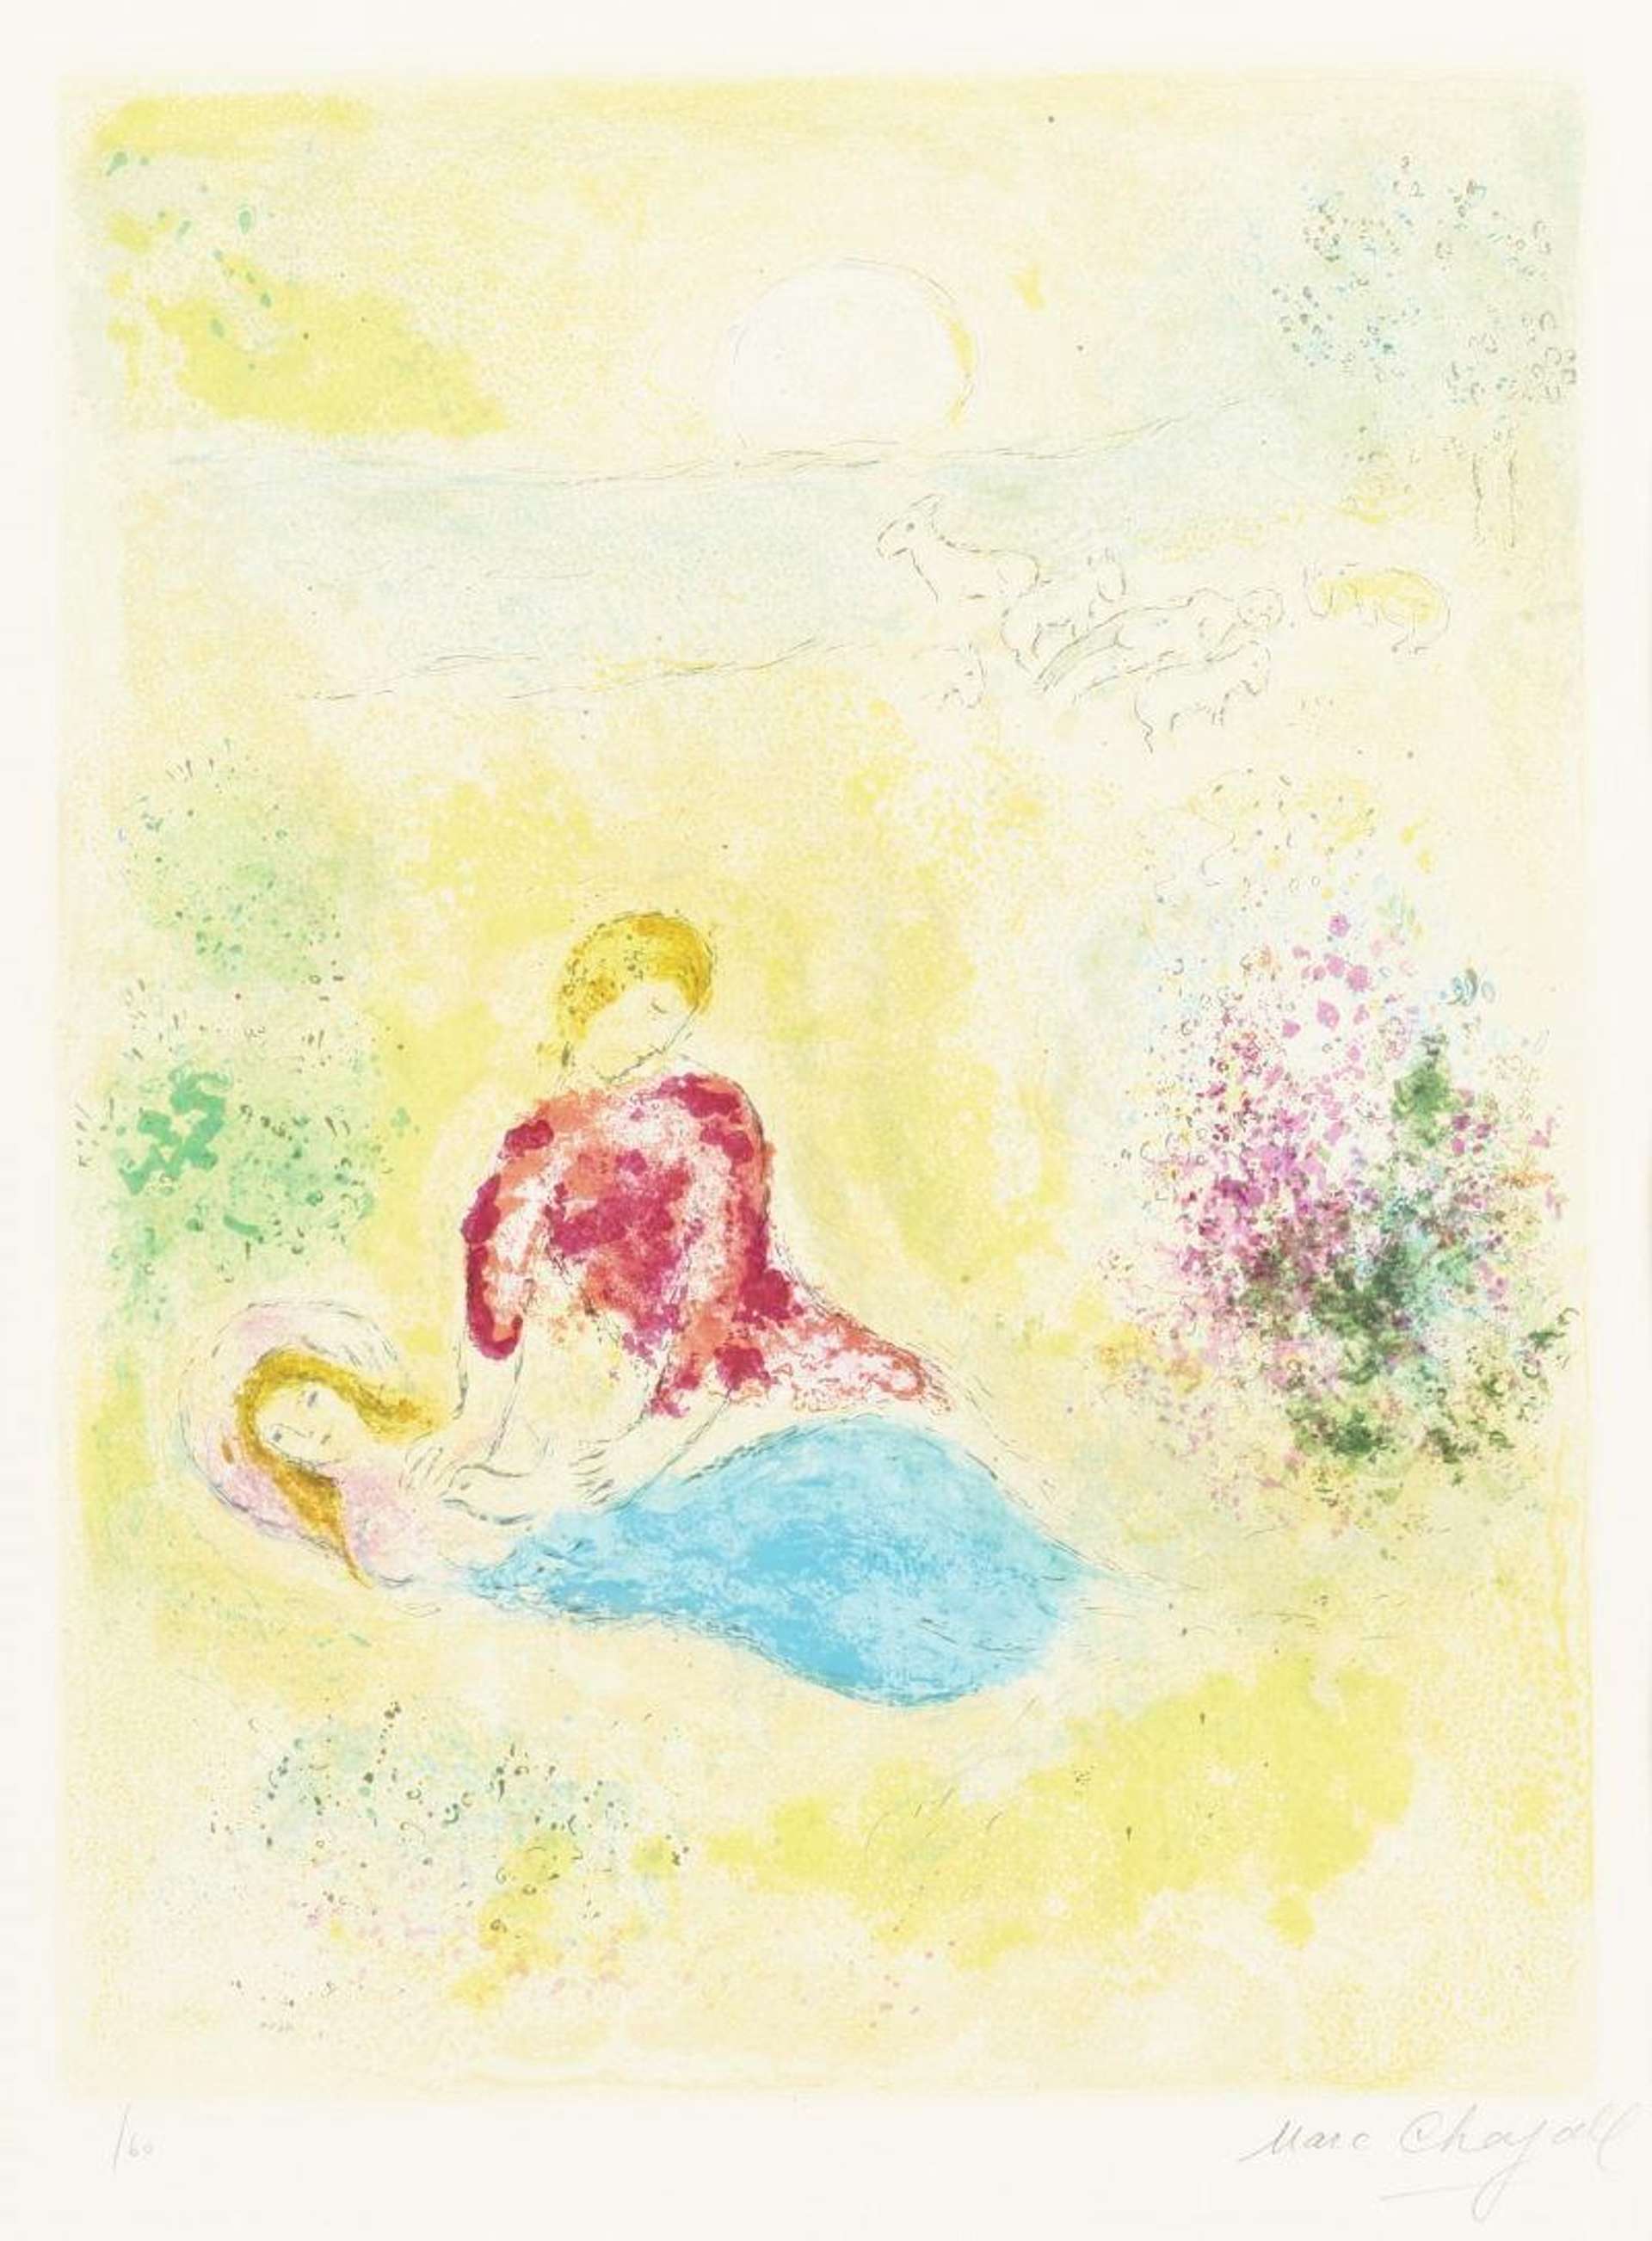 Marc Chagall: The Little Swallow - Signed Print